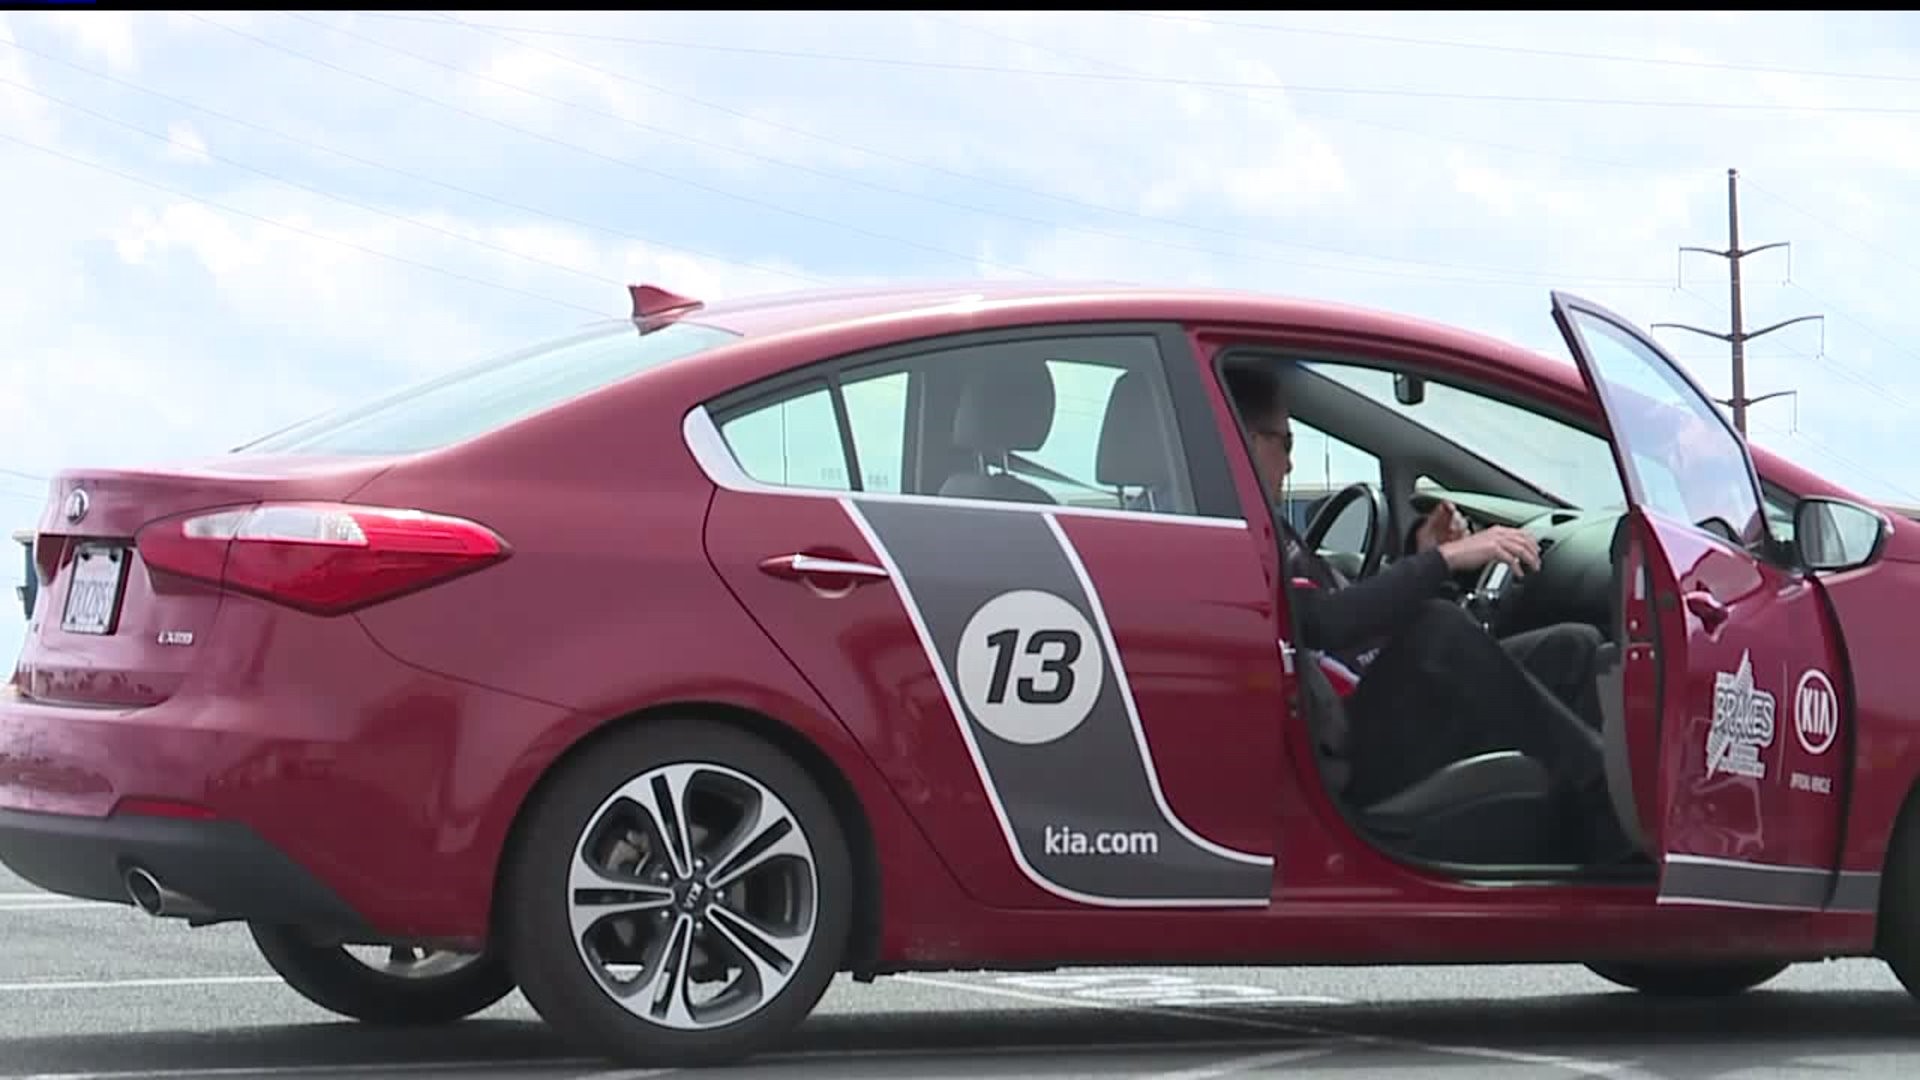 BRAKES defensive driving program teaches teens how to be safe behind the wheel